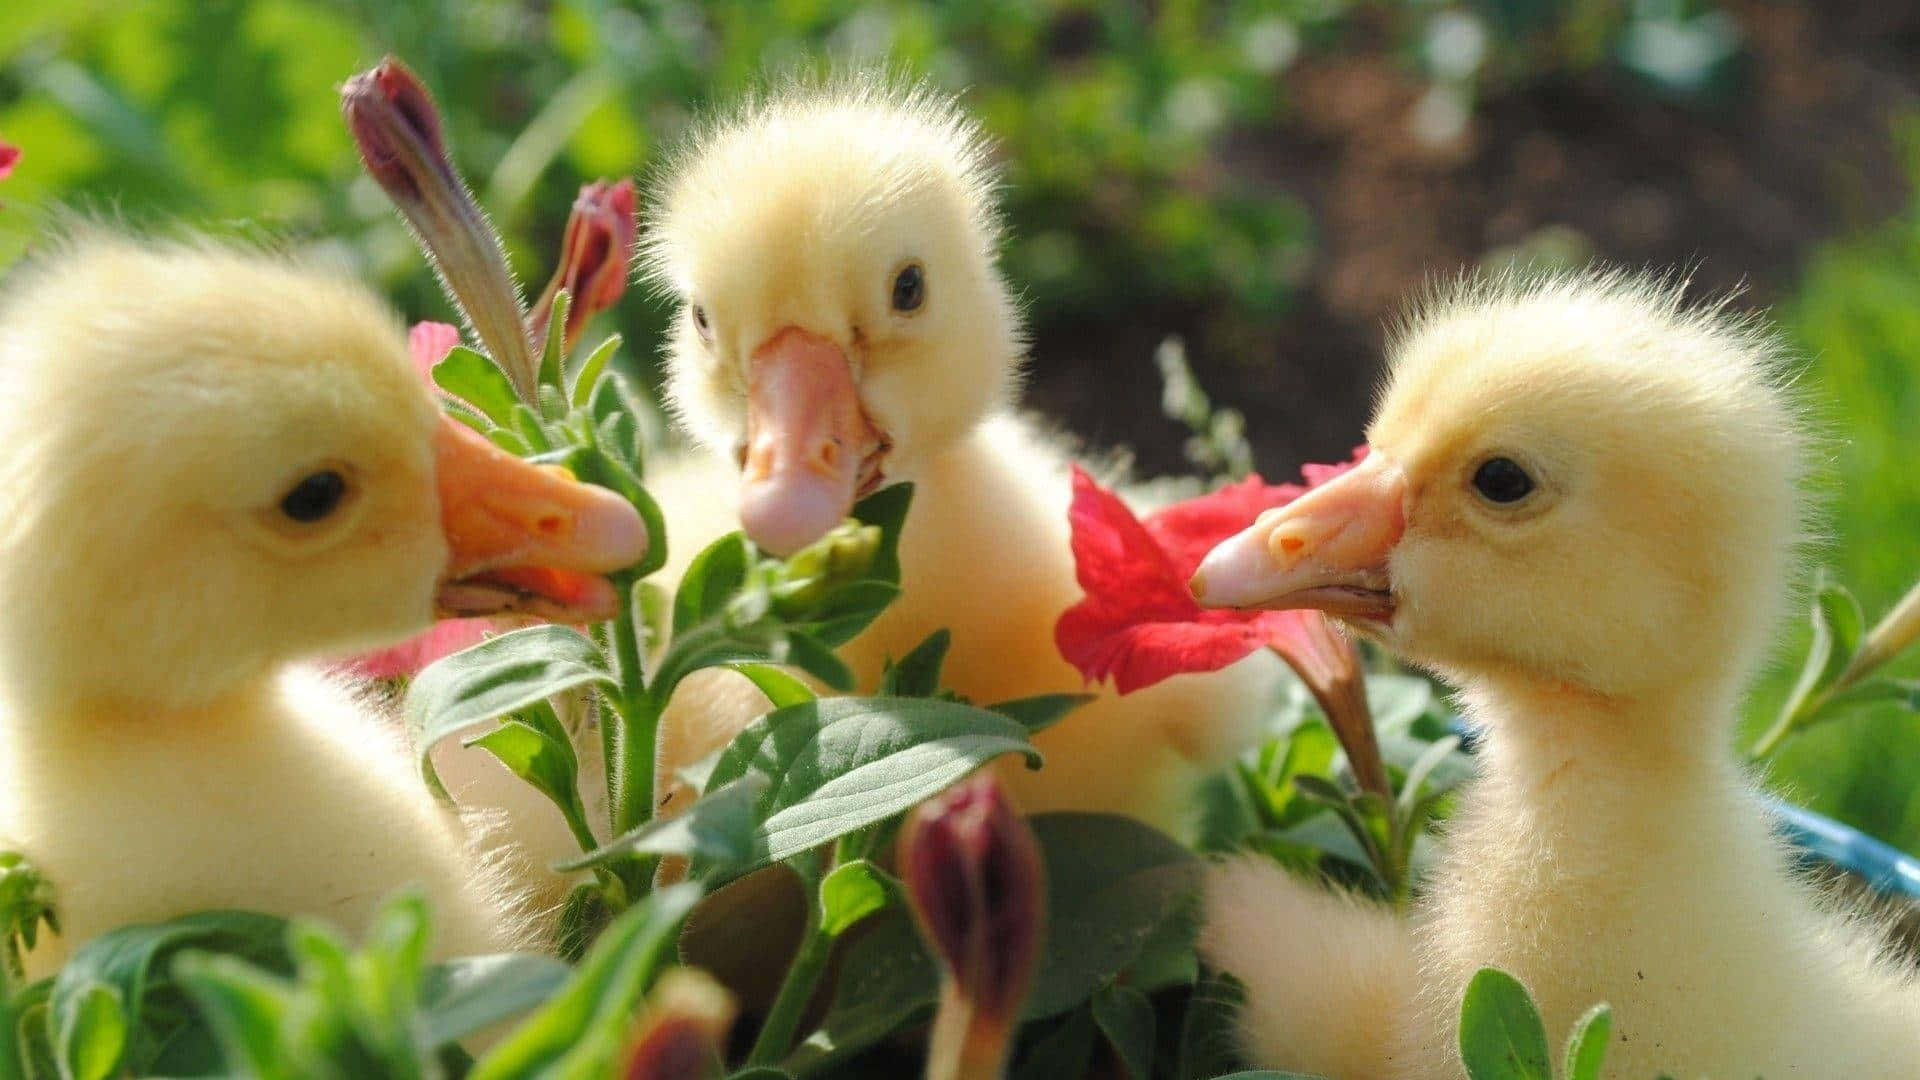 200+] Baby Duck Pictures